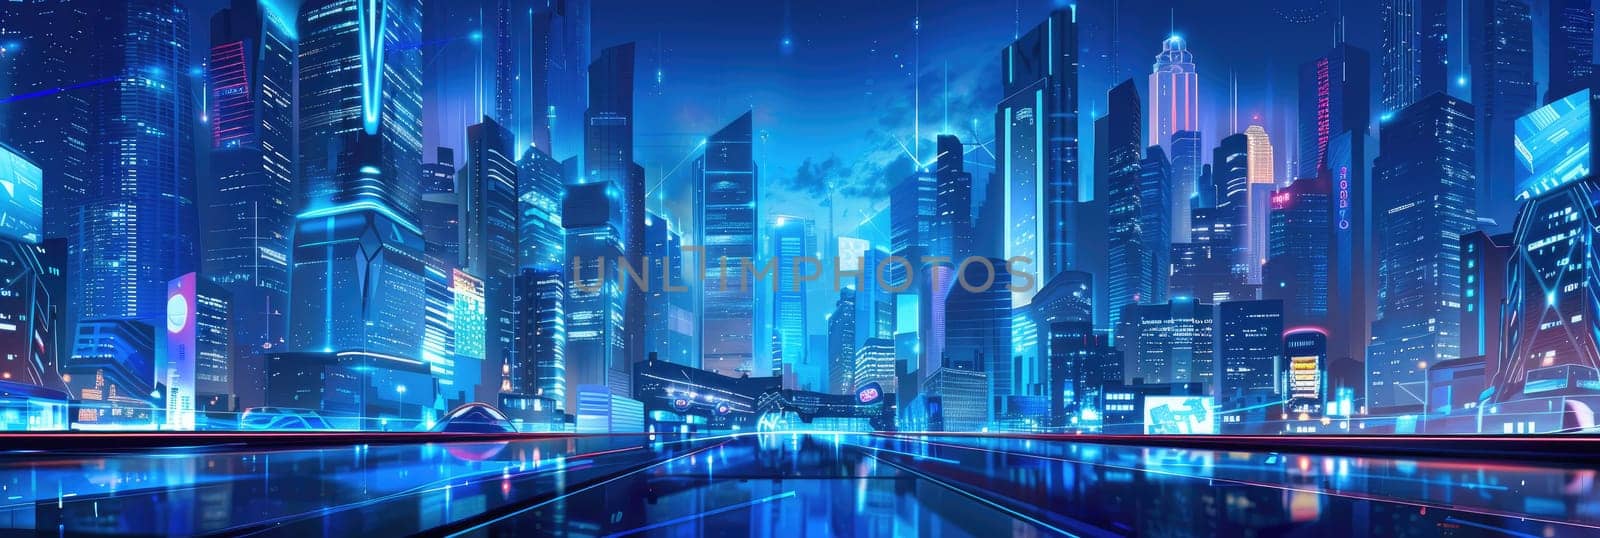 A cityscape with a blue sky and a reflection of the city in the water by AI generated image.